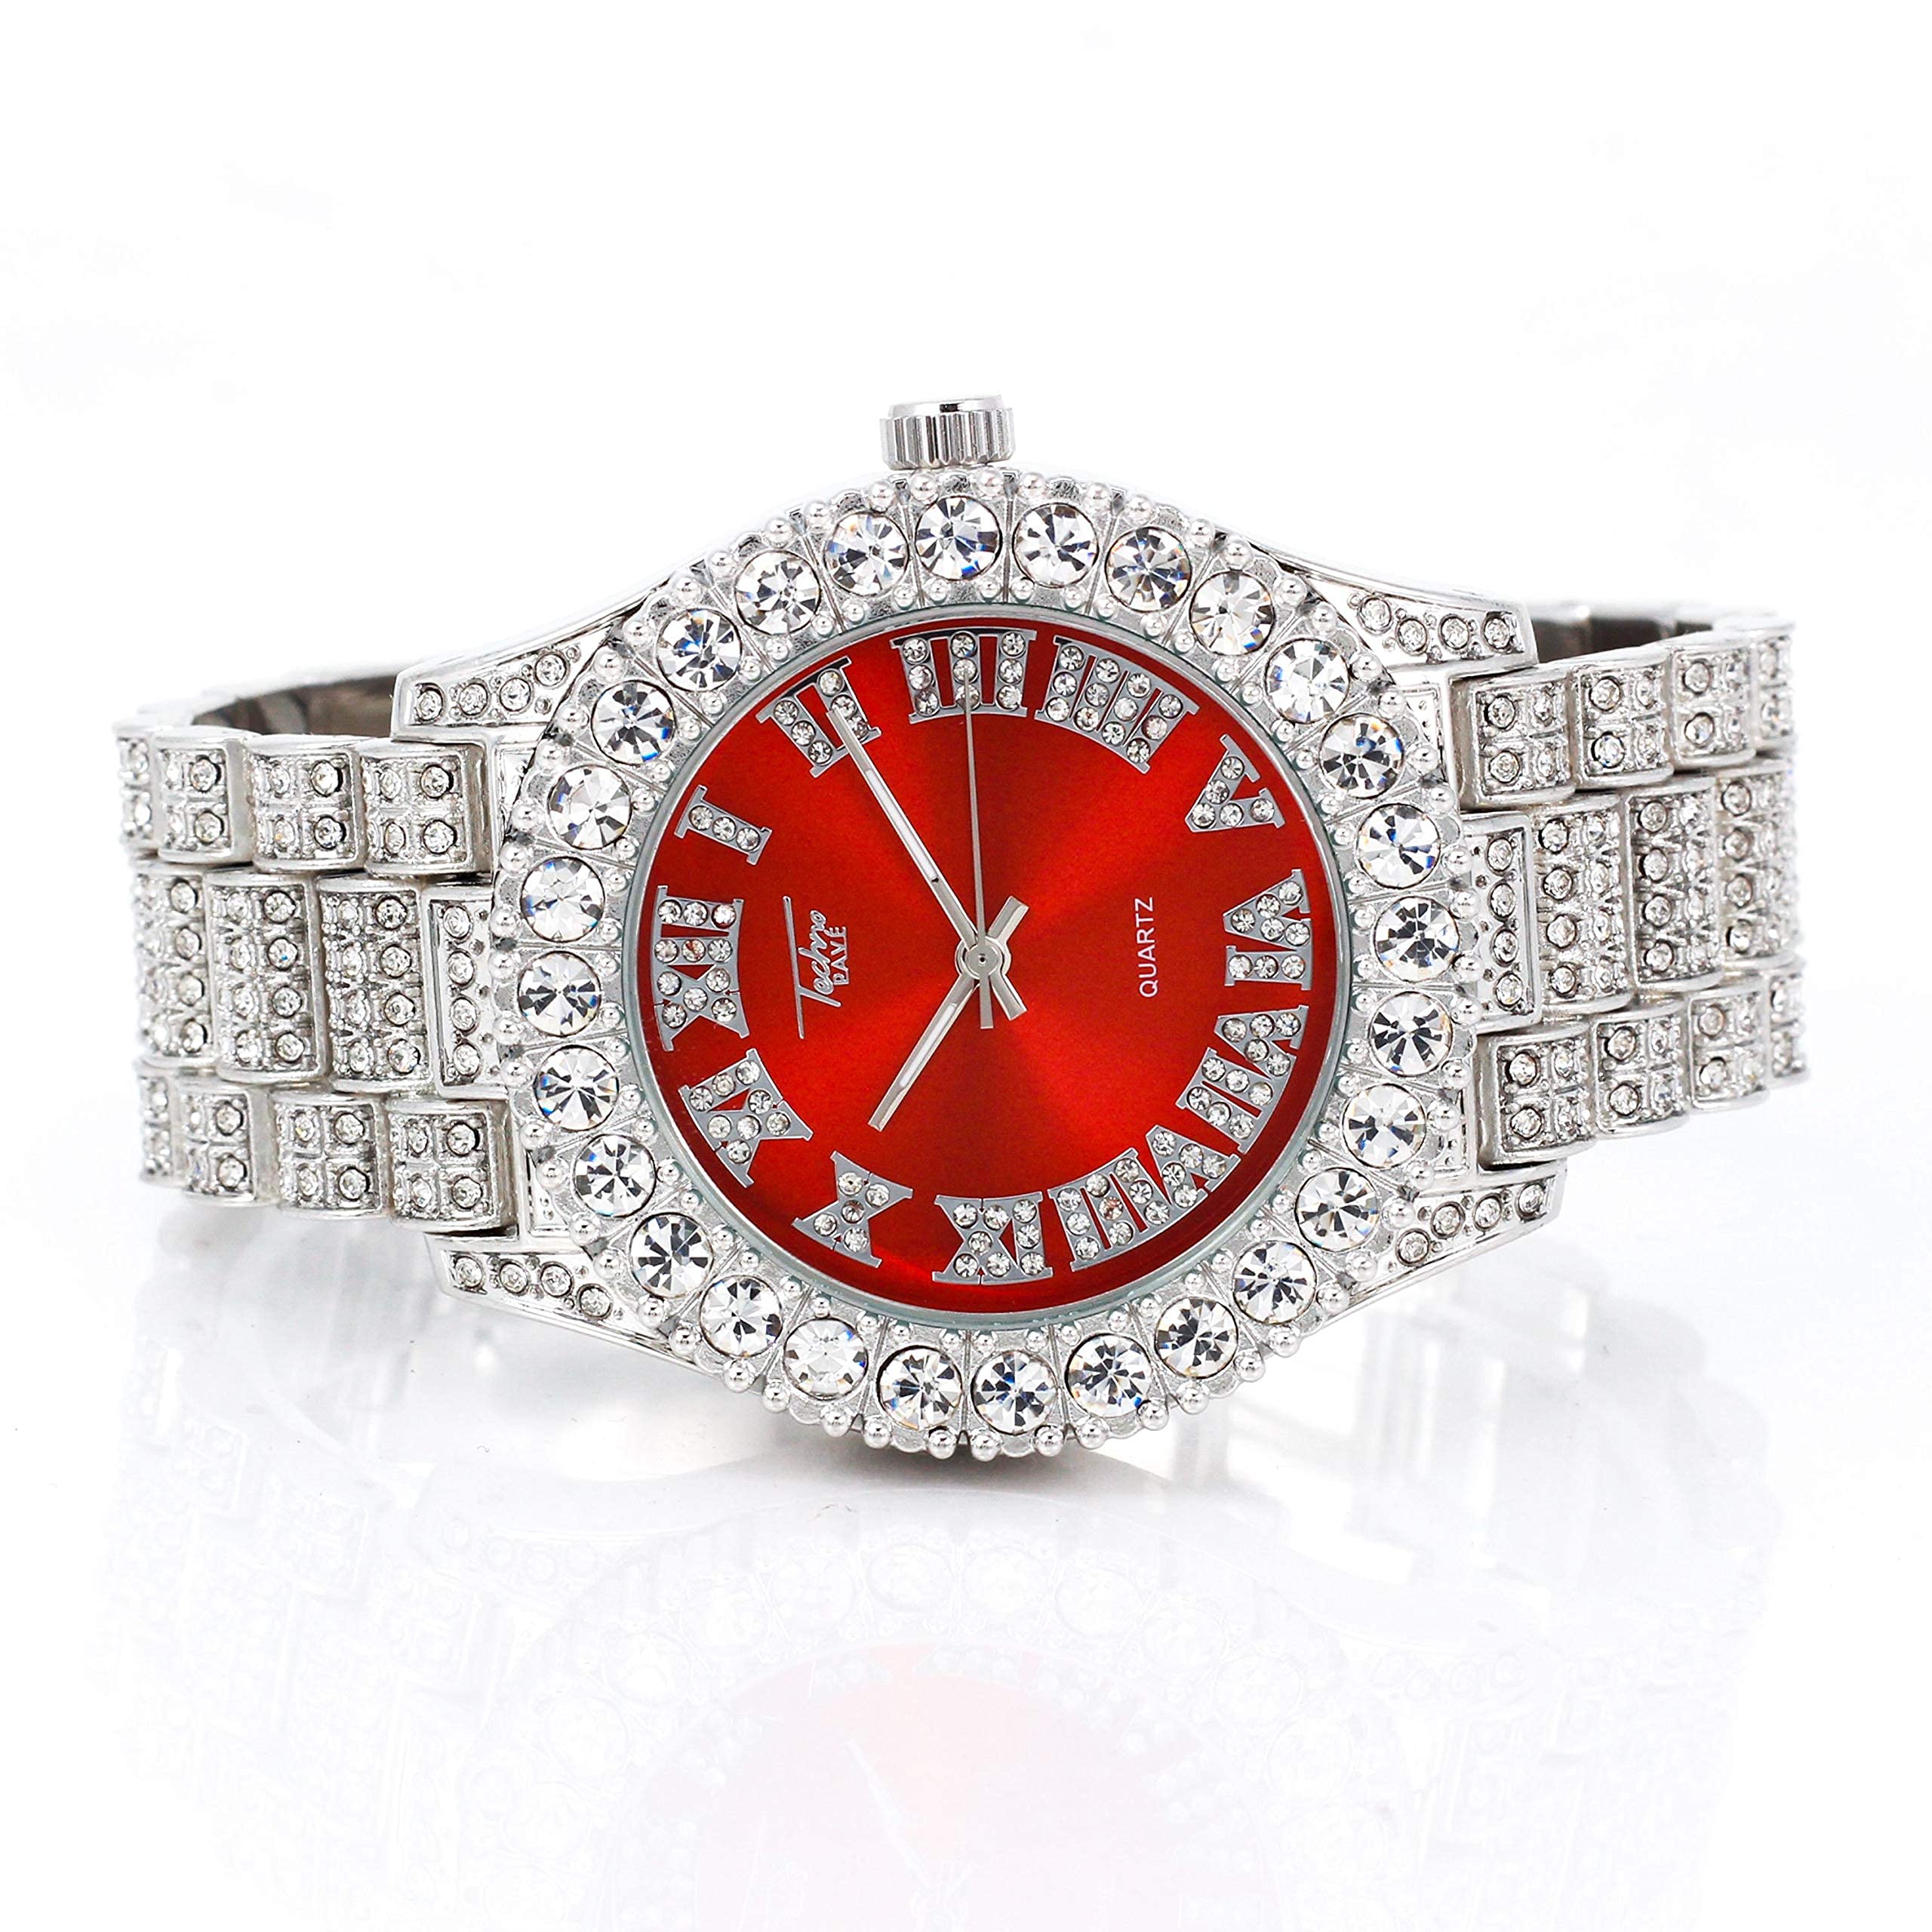 Men's Round Iced Out Watch 44mm Silver - Roman Dial